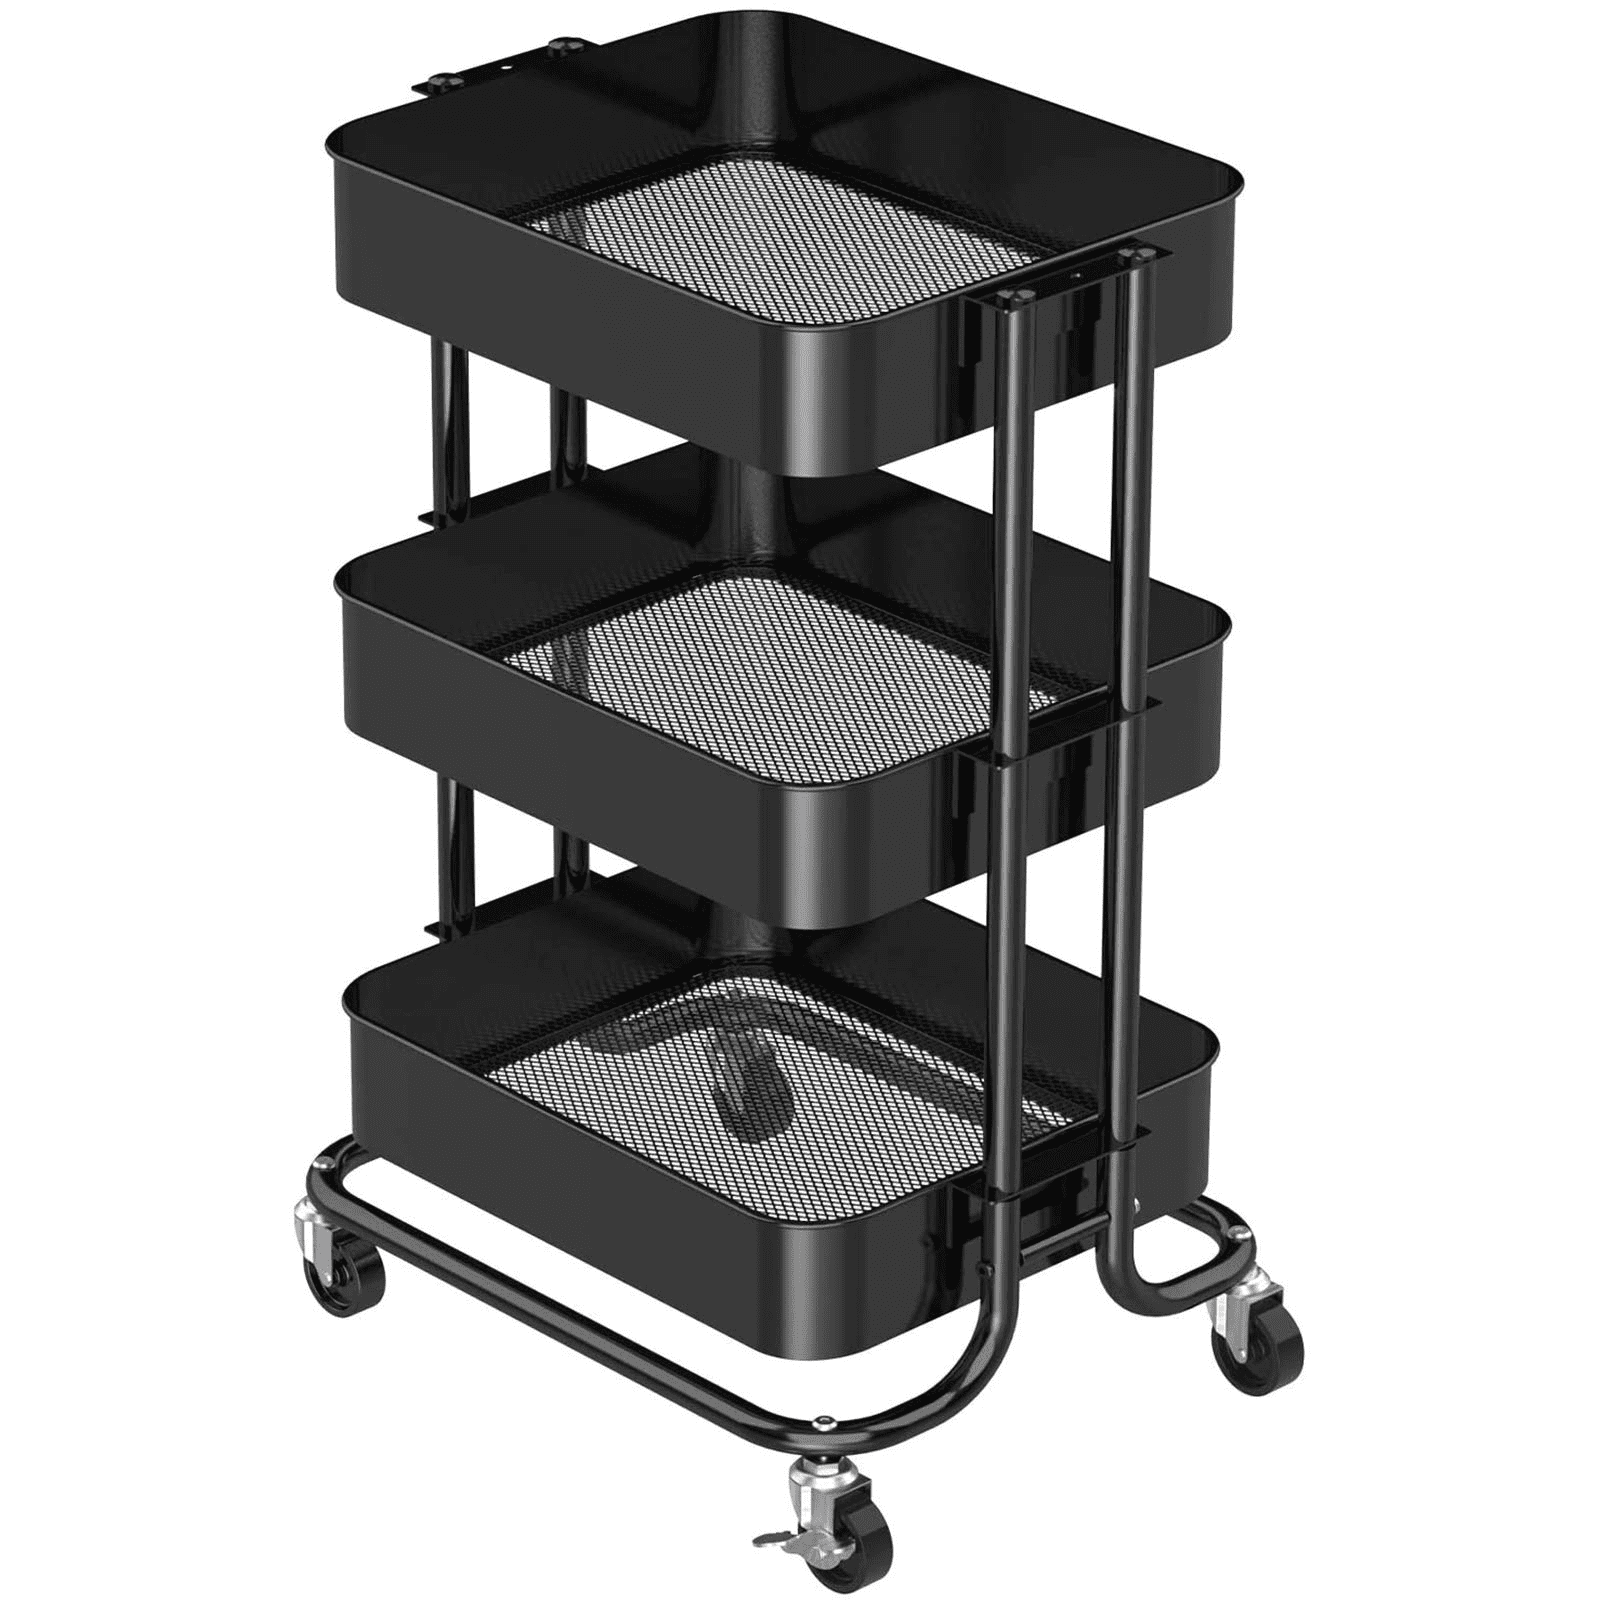 3-Tier Metal Rolling Utility Cart, Multifunction Storage Trolley with 2 Lockable Wheels for Home Office Kitchen(Black)